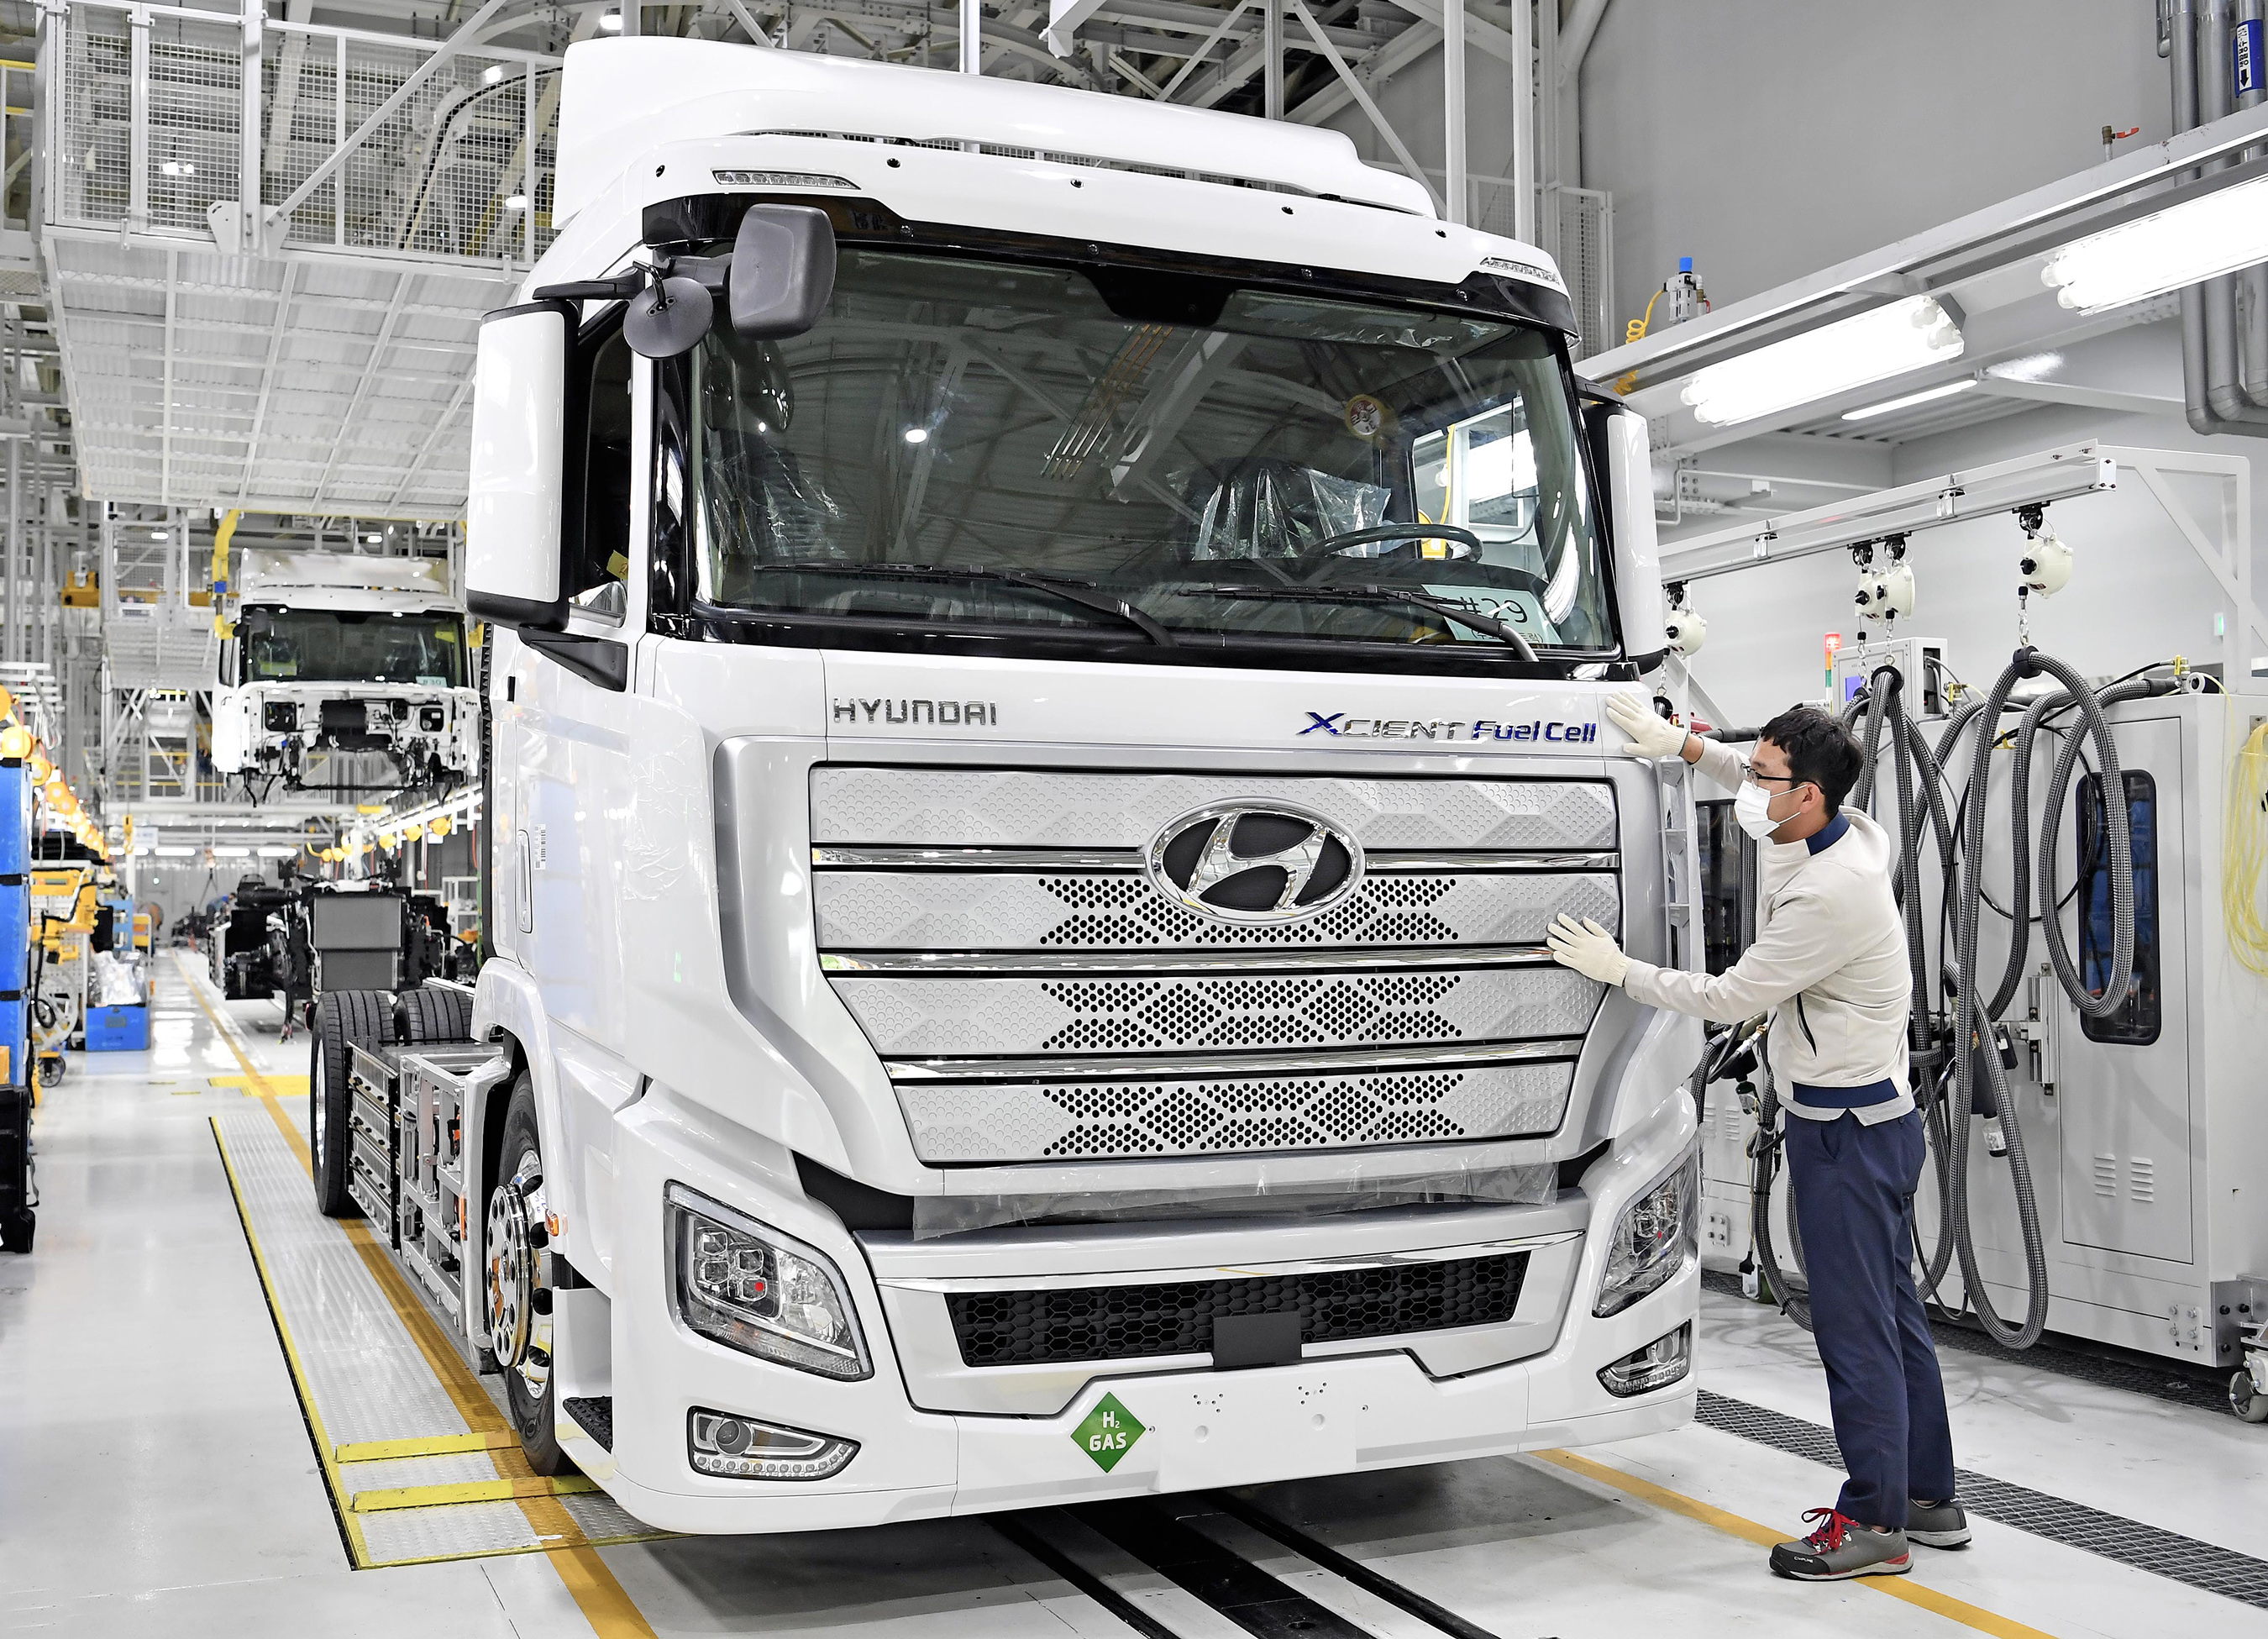 World’s First Fuel Cell Heavy-Duty Truck, Hyundai XCIENT Fuel Cell, Heads to Europe for Commercial Use